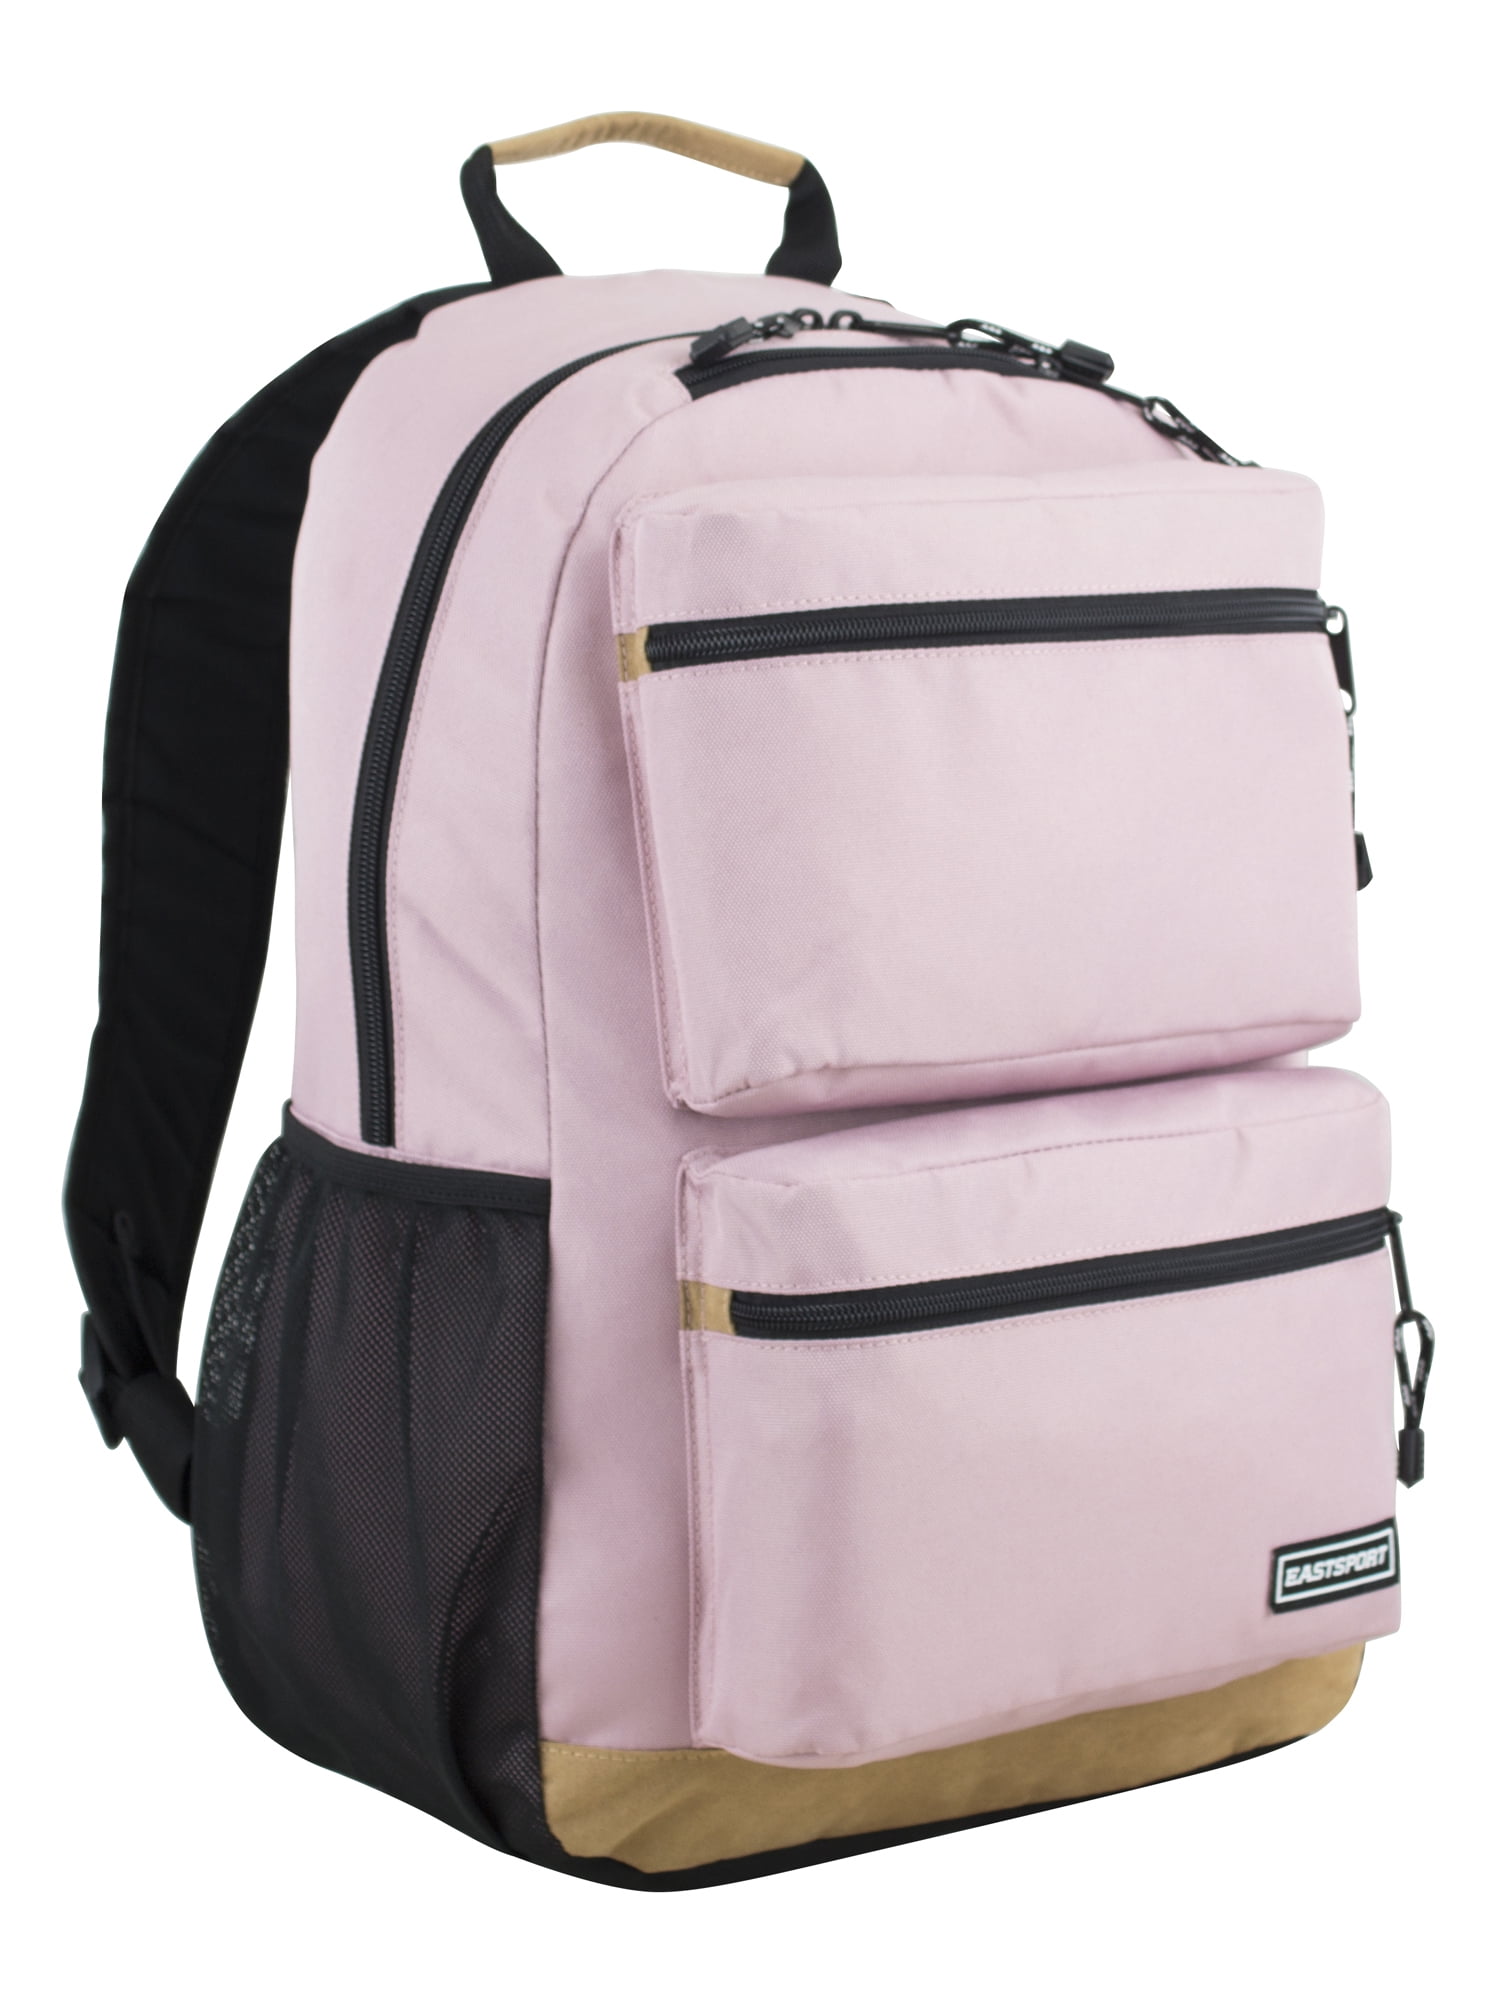 Eastsport Women's Limited Mini Backpack Pink Grey, Size: One size, Gray